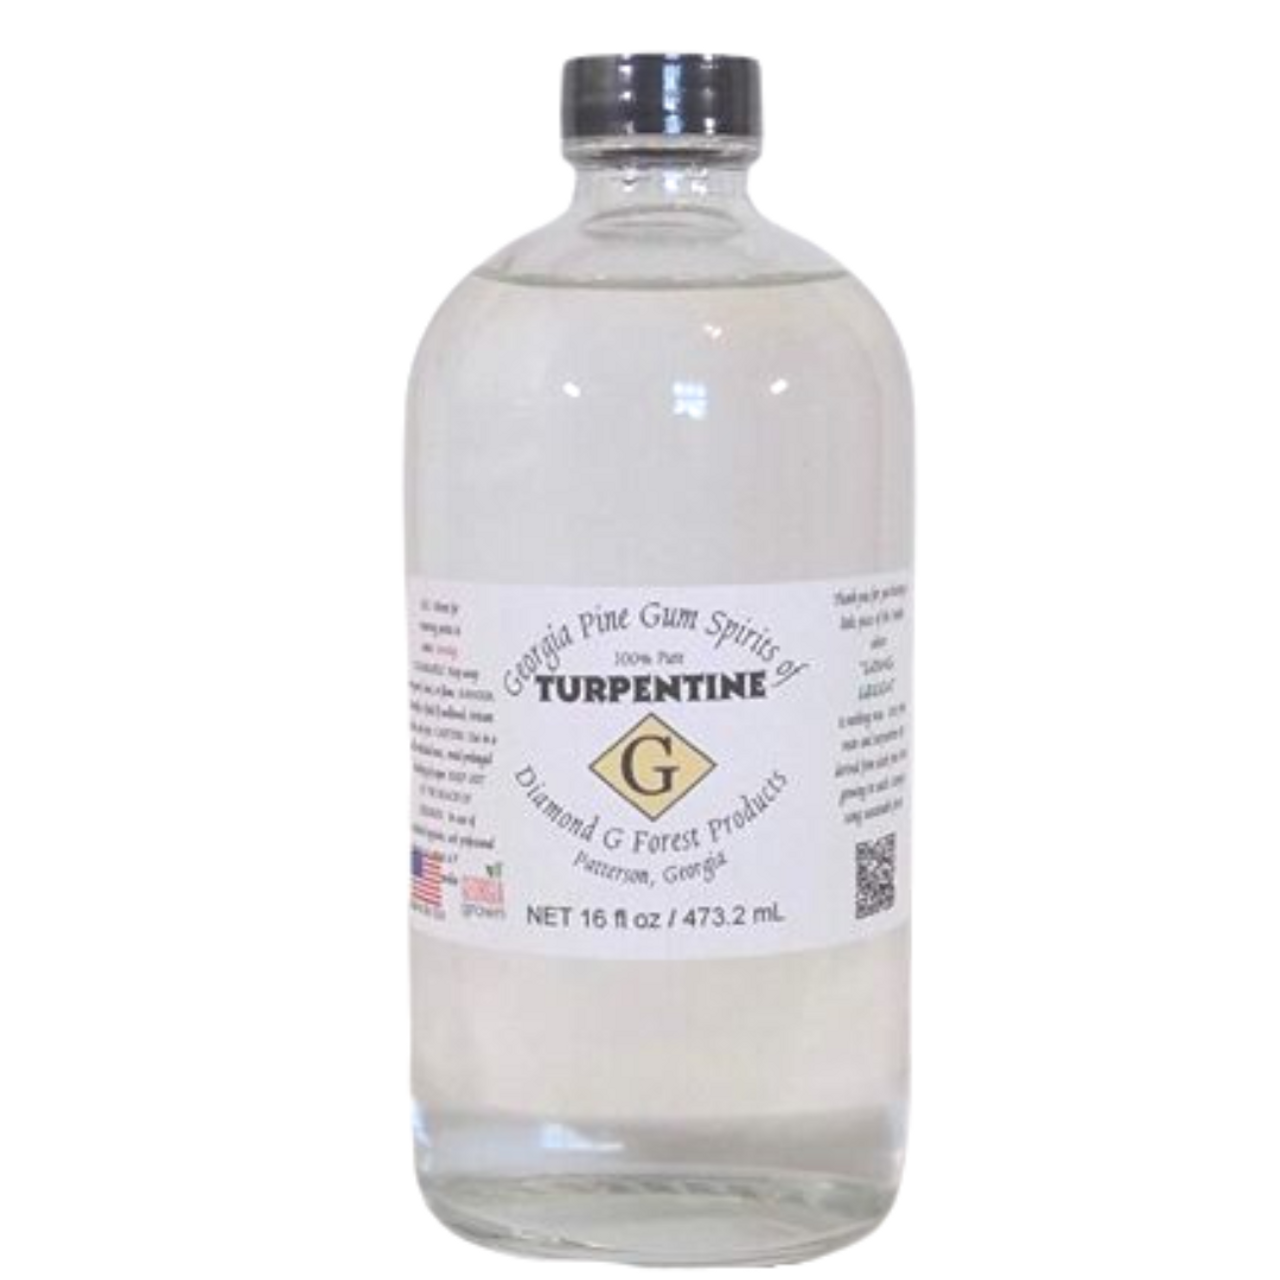 Diamond G Forest 100% Pure Gum Spirits of Turpentine - 1oz Bottle – E-Tail  24/7 Limited